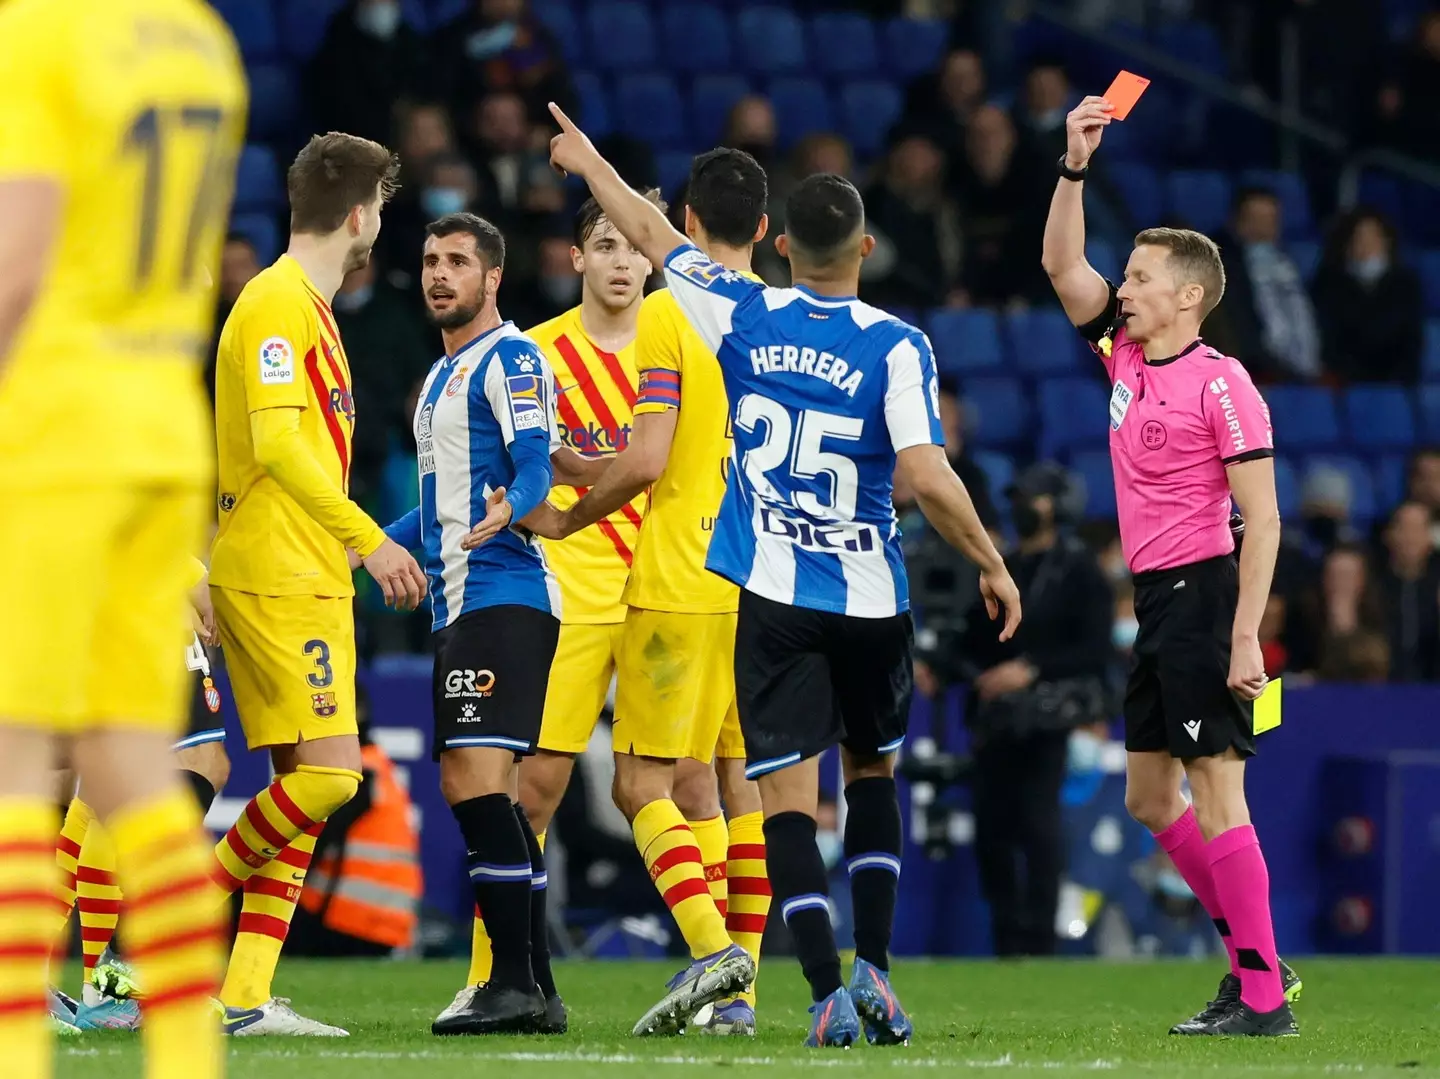 Pique was sent off late in the 2-2 draw on Sunday (Image: PA)